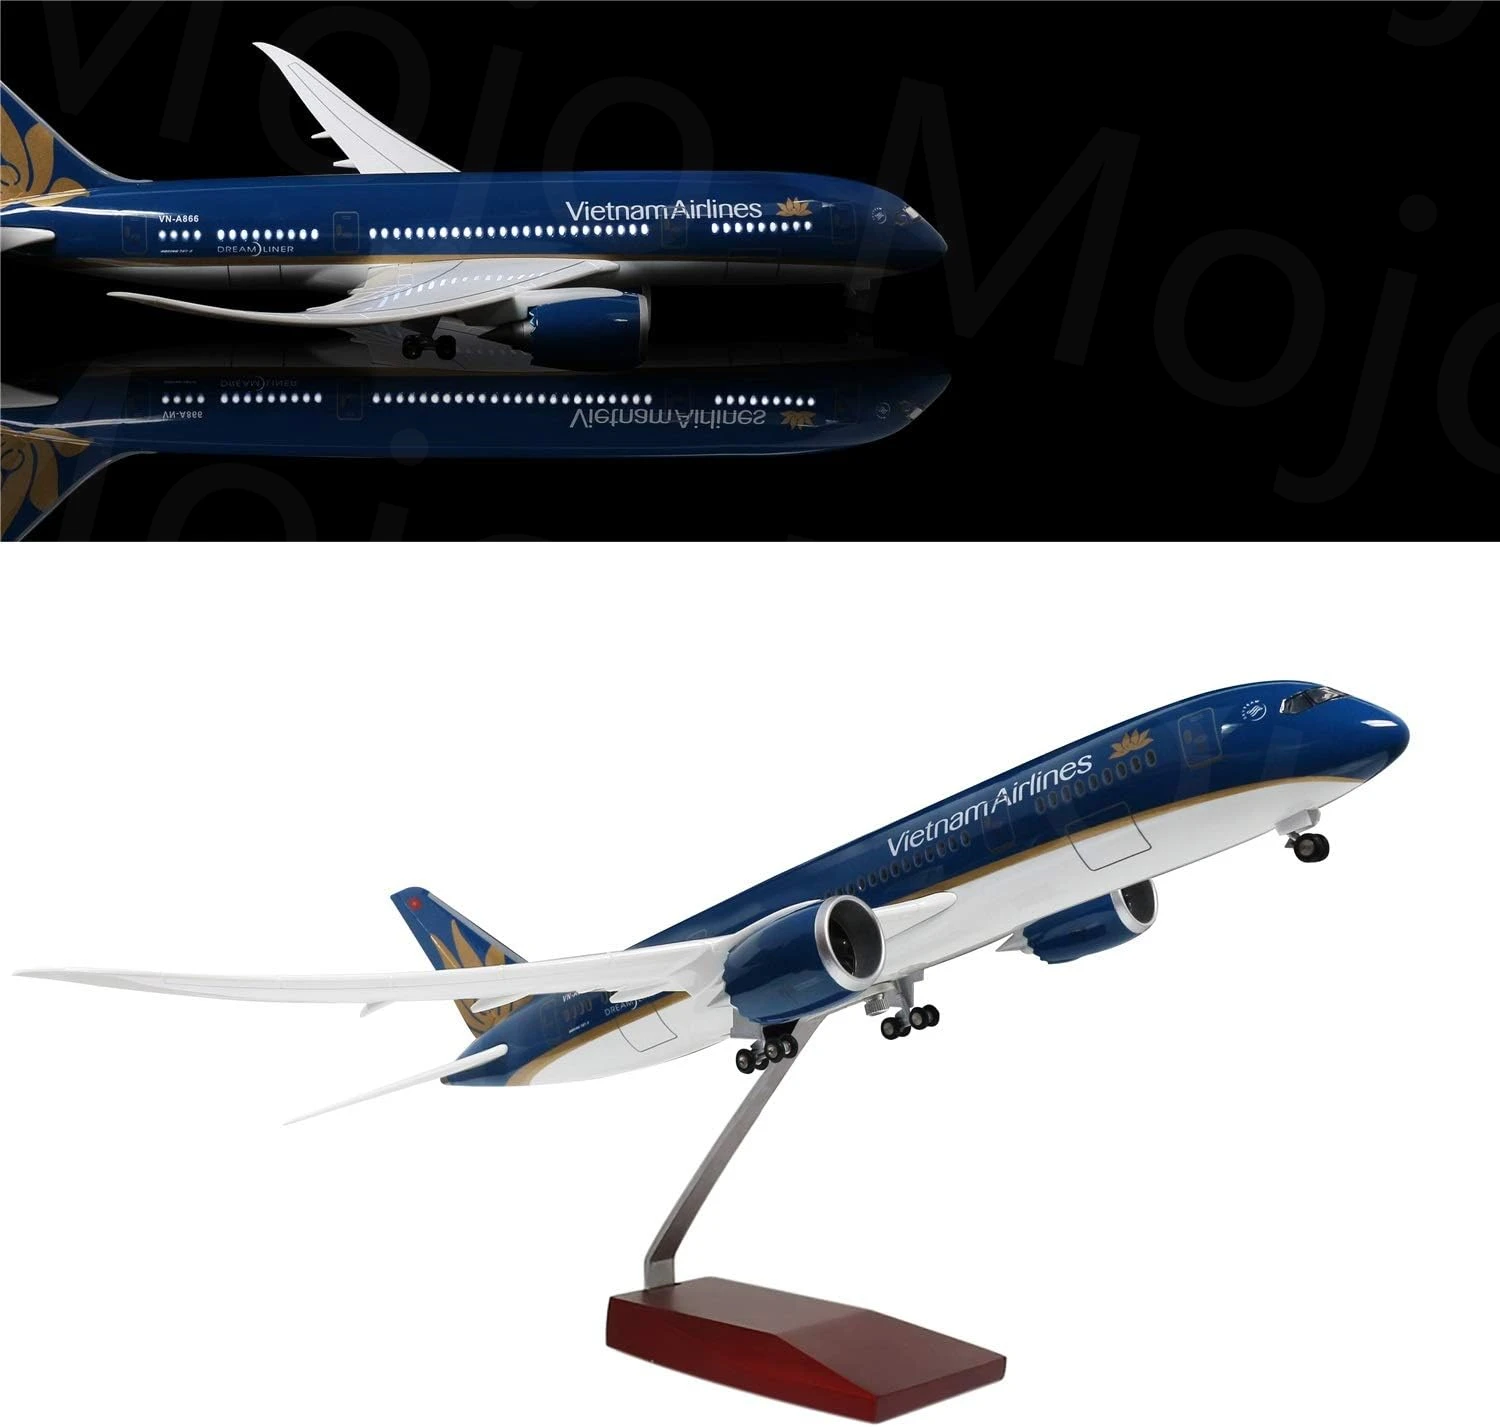 

1:130 Scale 43cm 787 Boeing Jet B787 Vietnam Aircraft Model Die-Cast Resin Aircraft Jewellery with LED Lights for Collection